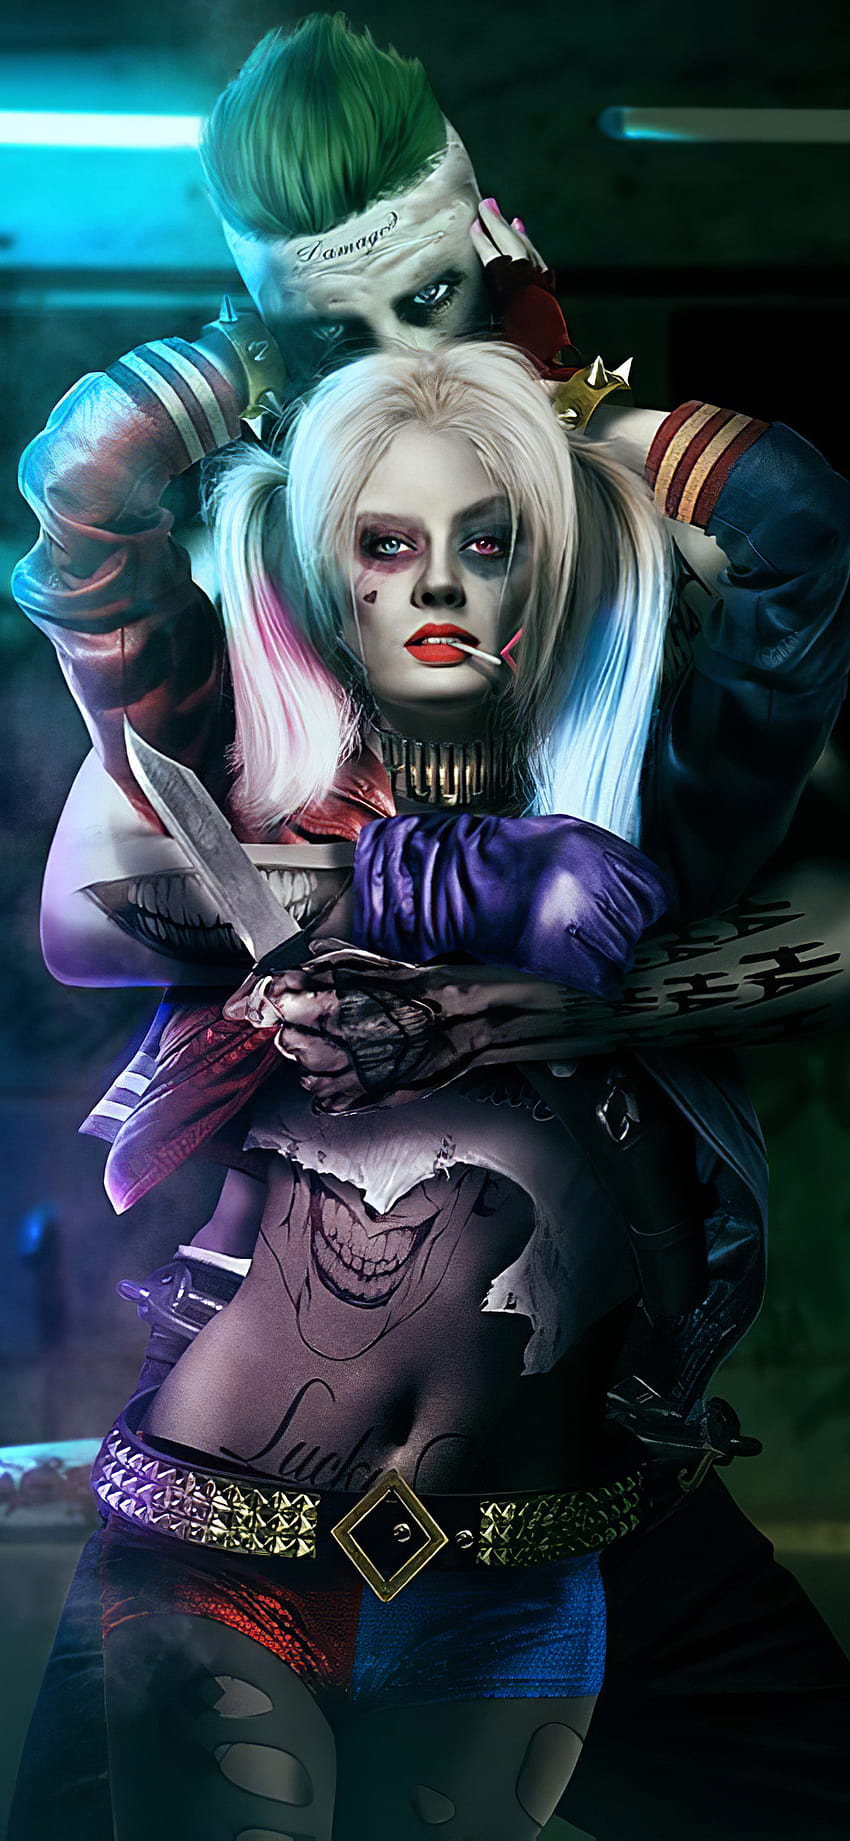 1080x1920  1080x1920 birds of prey movies 2020 movies hd harley quinn  for Iphone 6 7 8 wallpaper  Coolwallpapersme